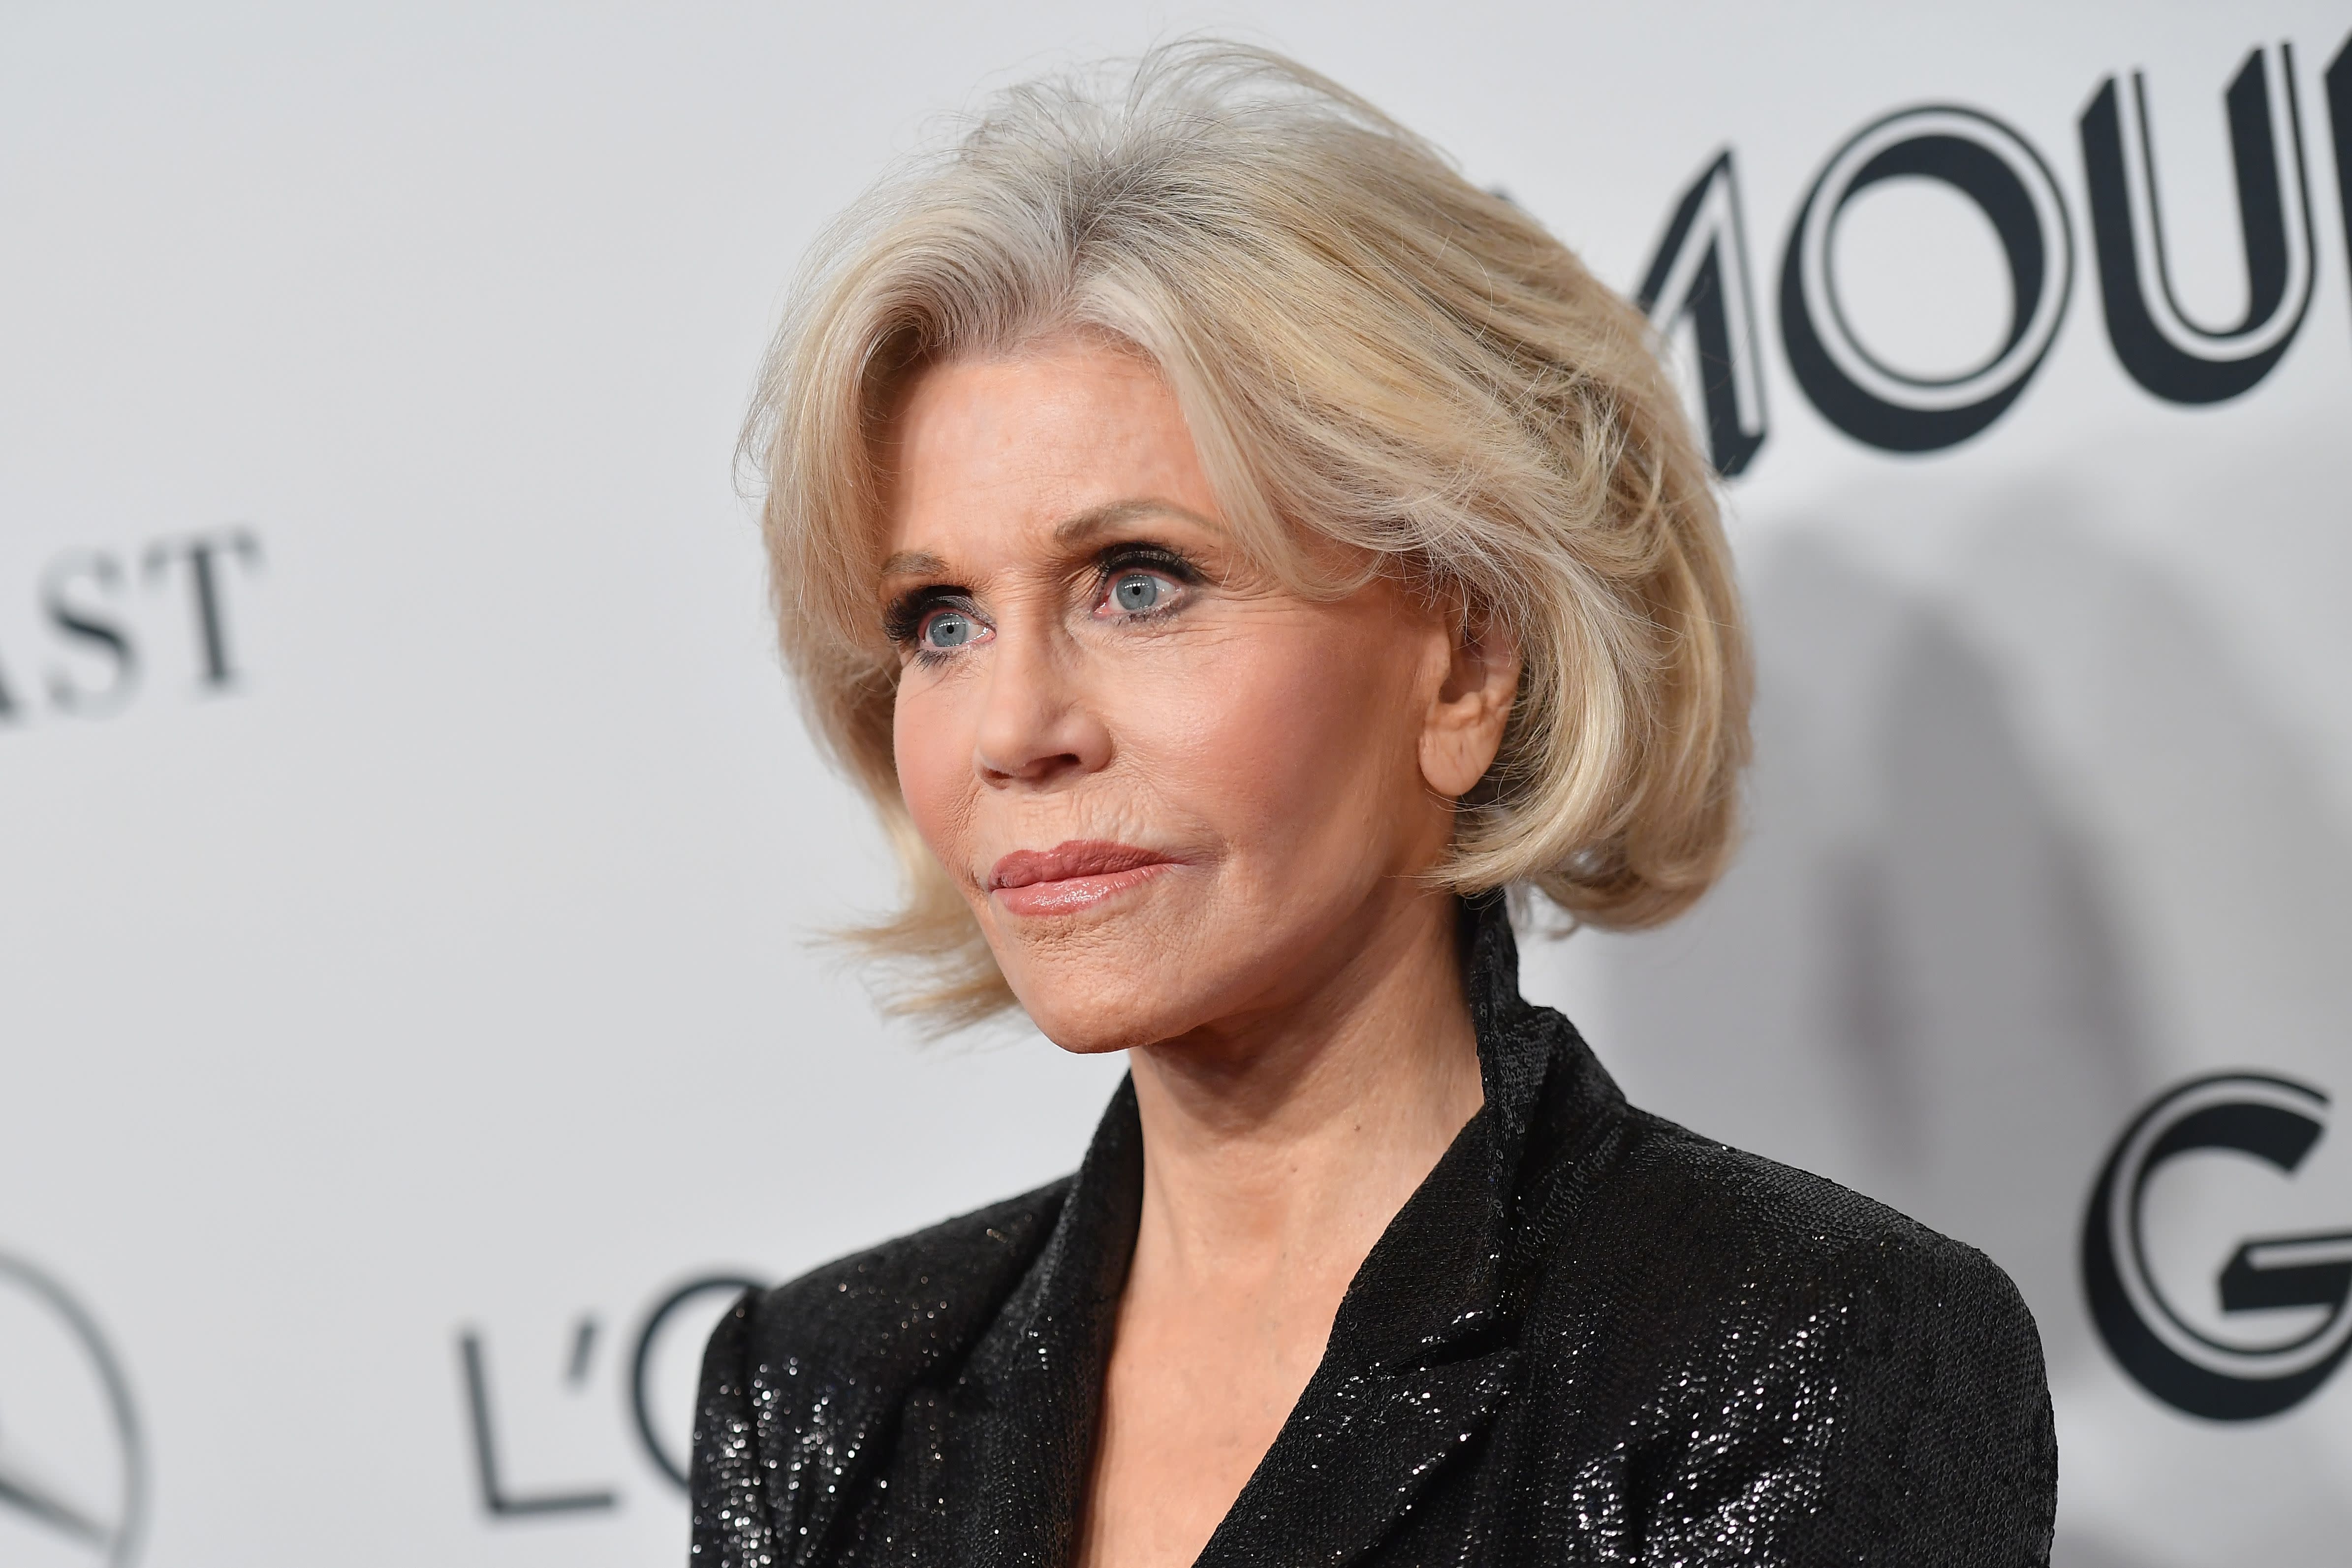 Jane Fonda 82 Says She Has No Time For Sex I Ve Had So Much Of It